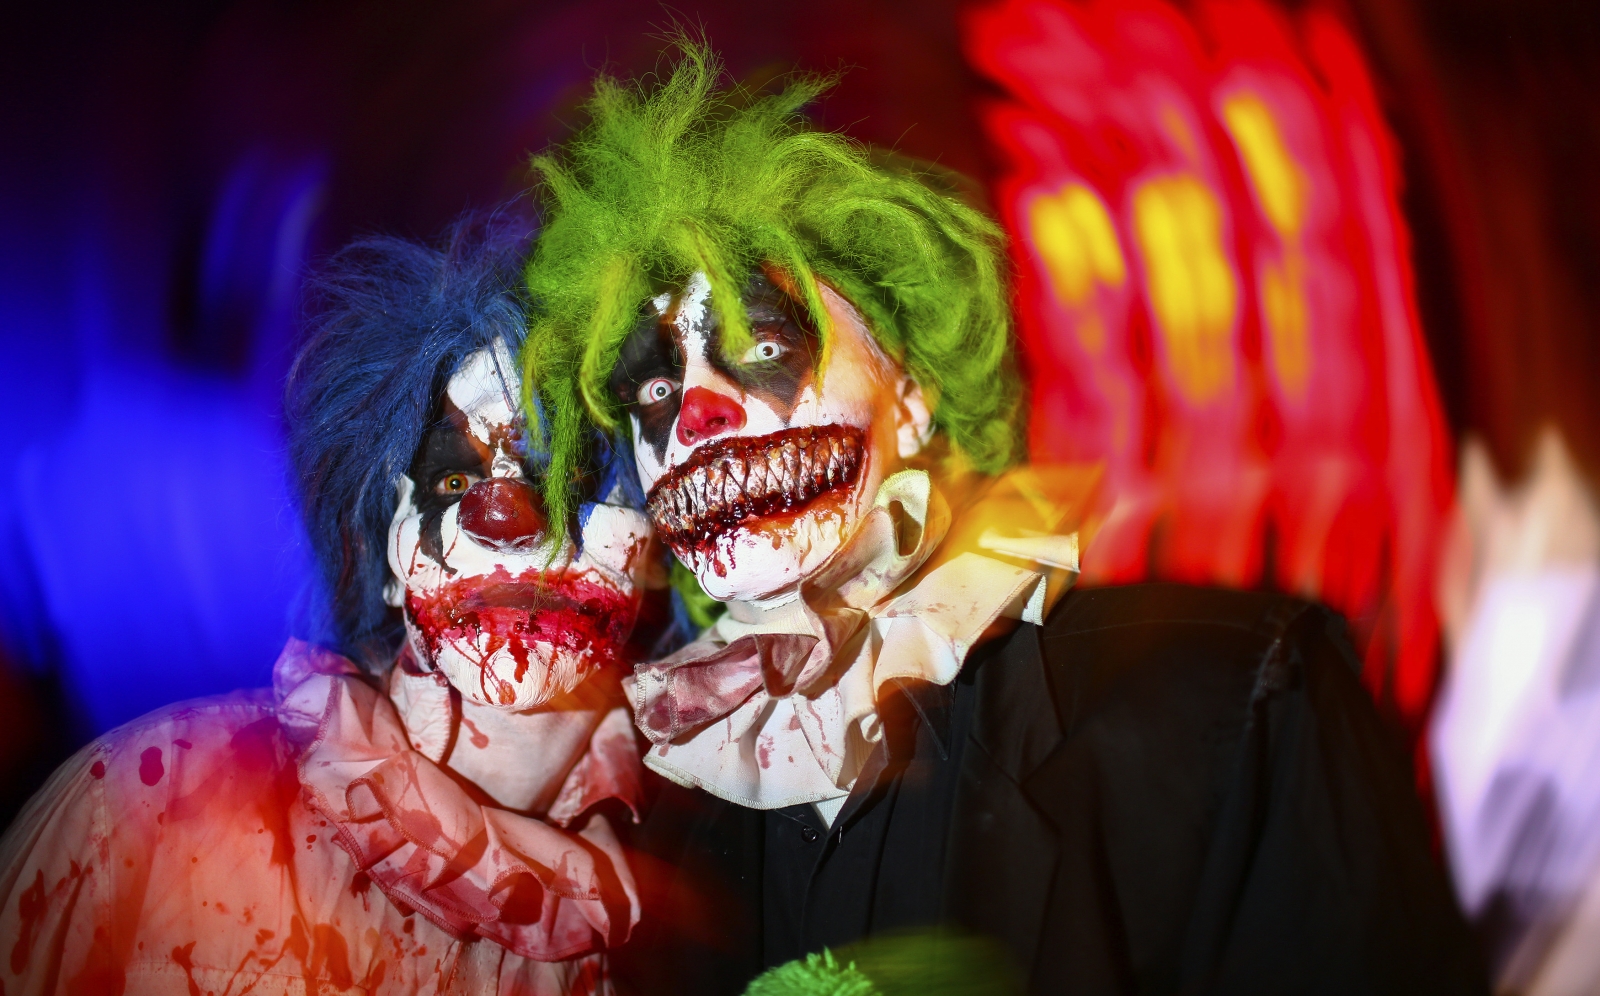 Halloween 2014: French Village Bans 'Evil Clown' Costumes Following